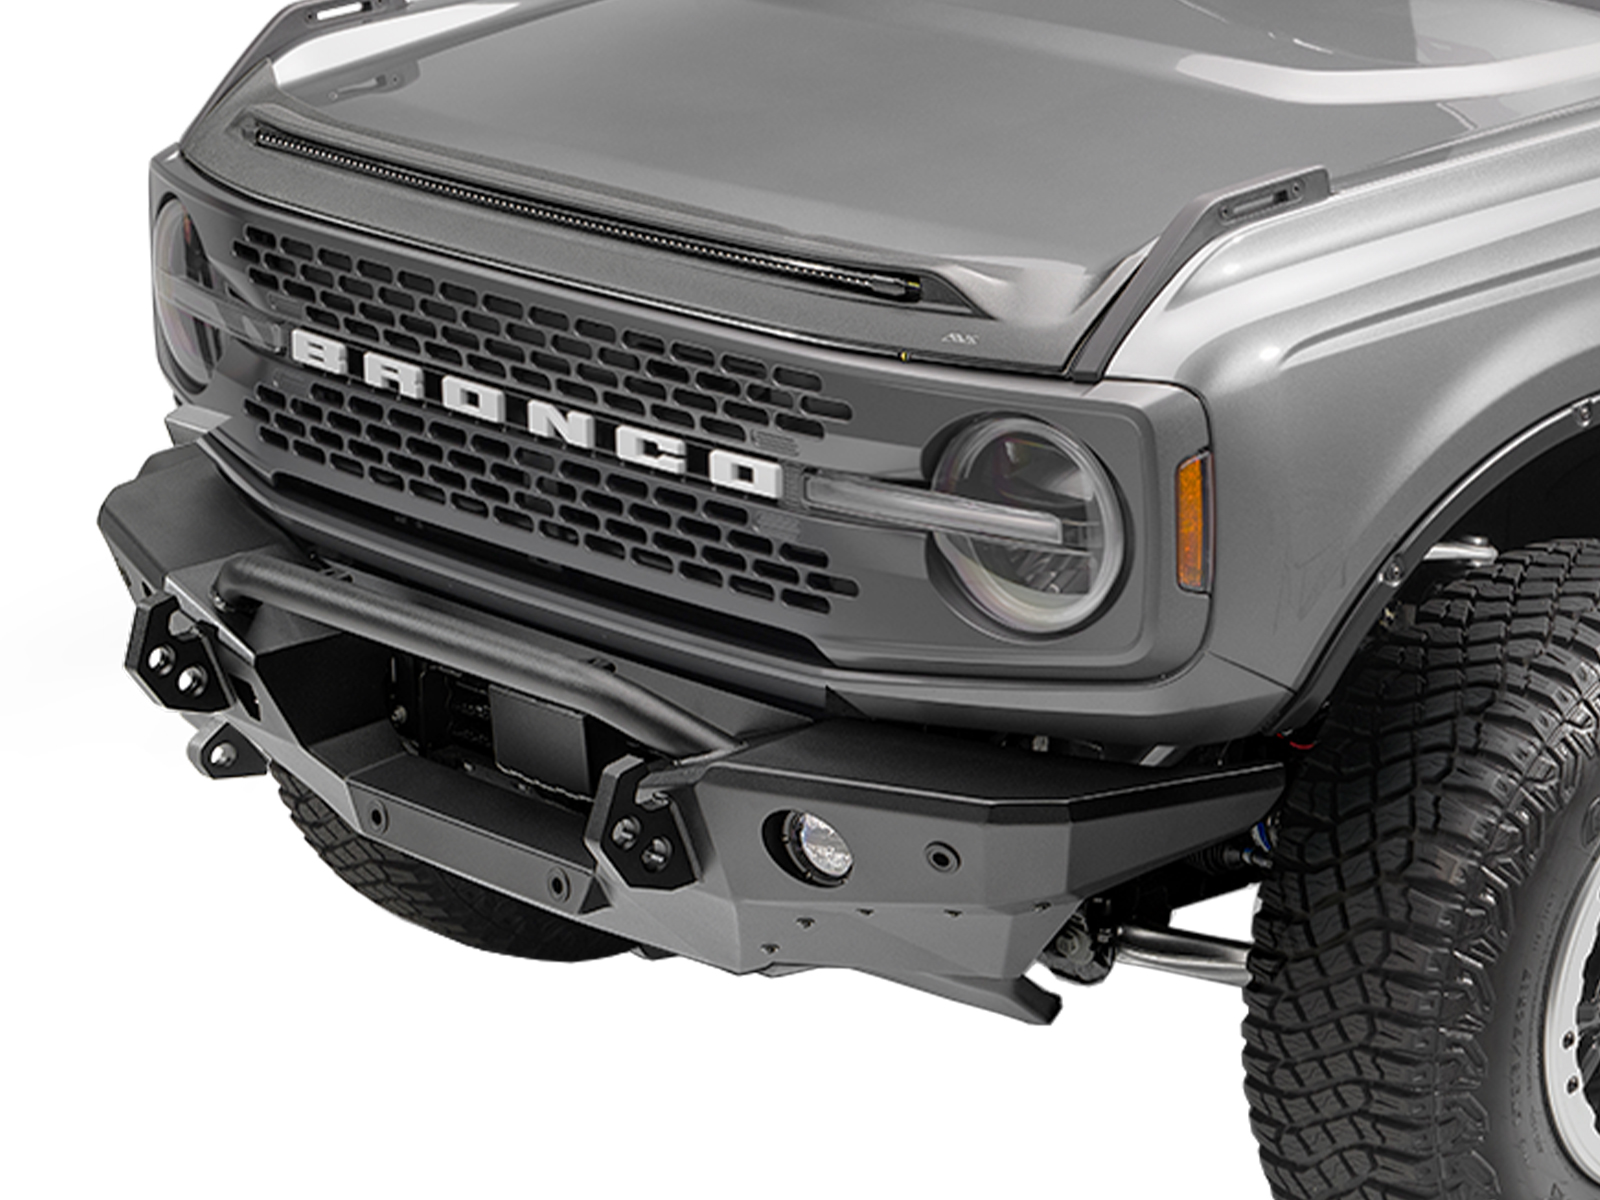 Why You Should Only Buy Steel Bumpers Made In The USA